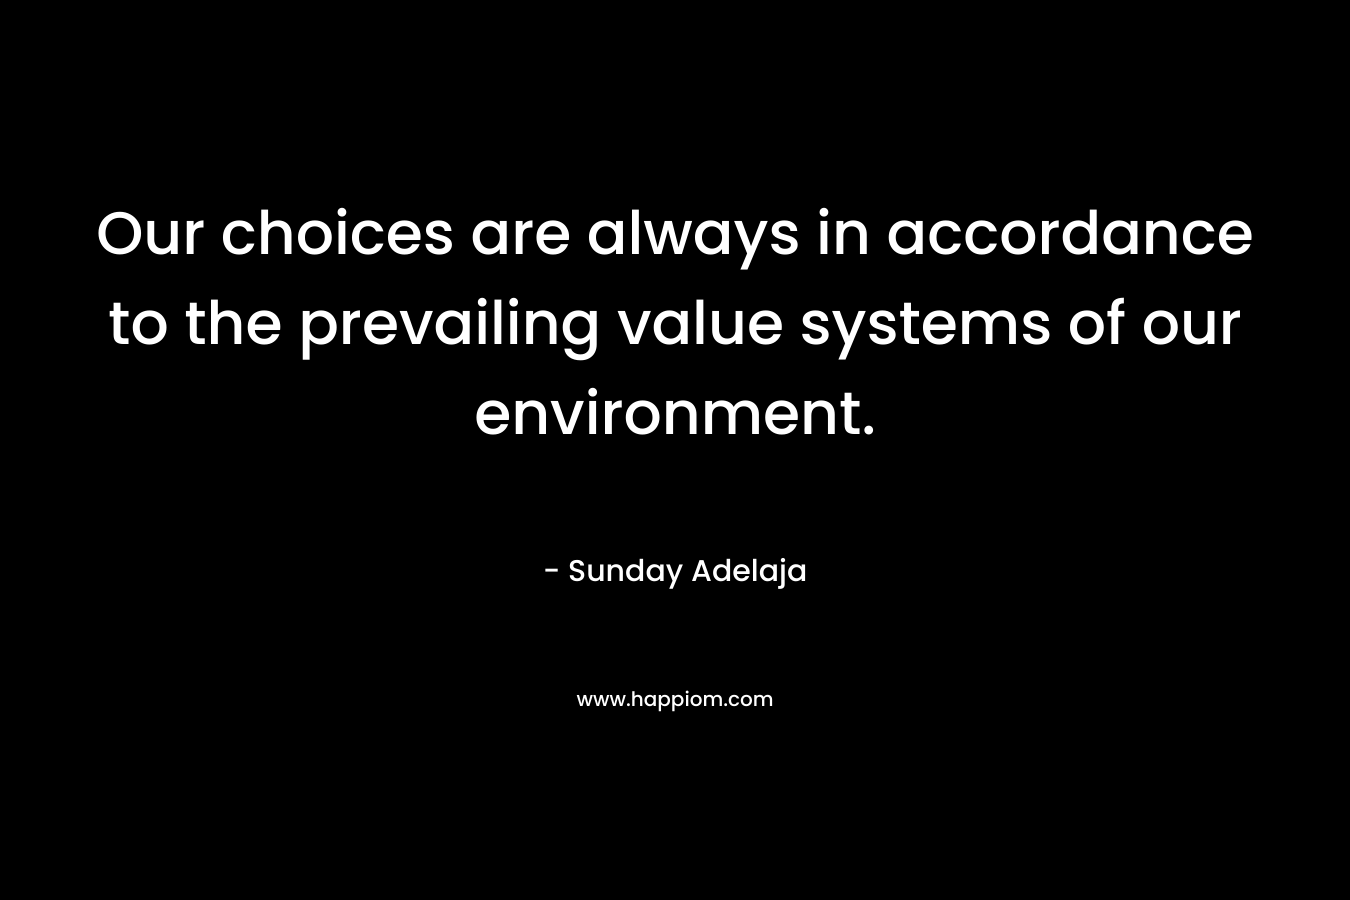 Our choices are always in accordance to the prevailing value systems of our environment. – Sunday Adelaja